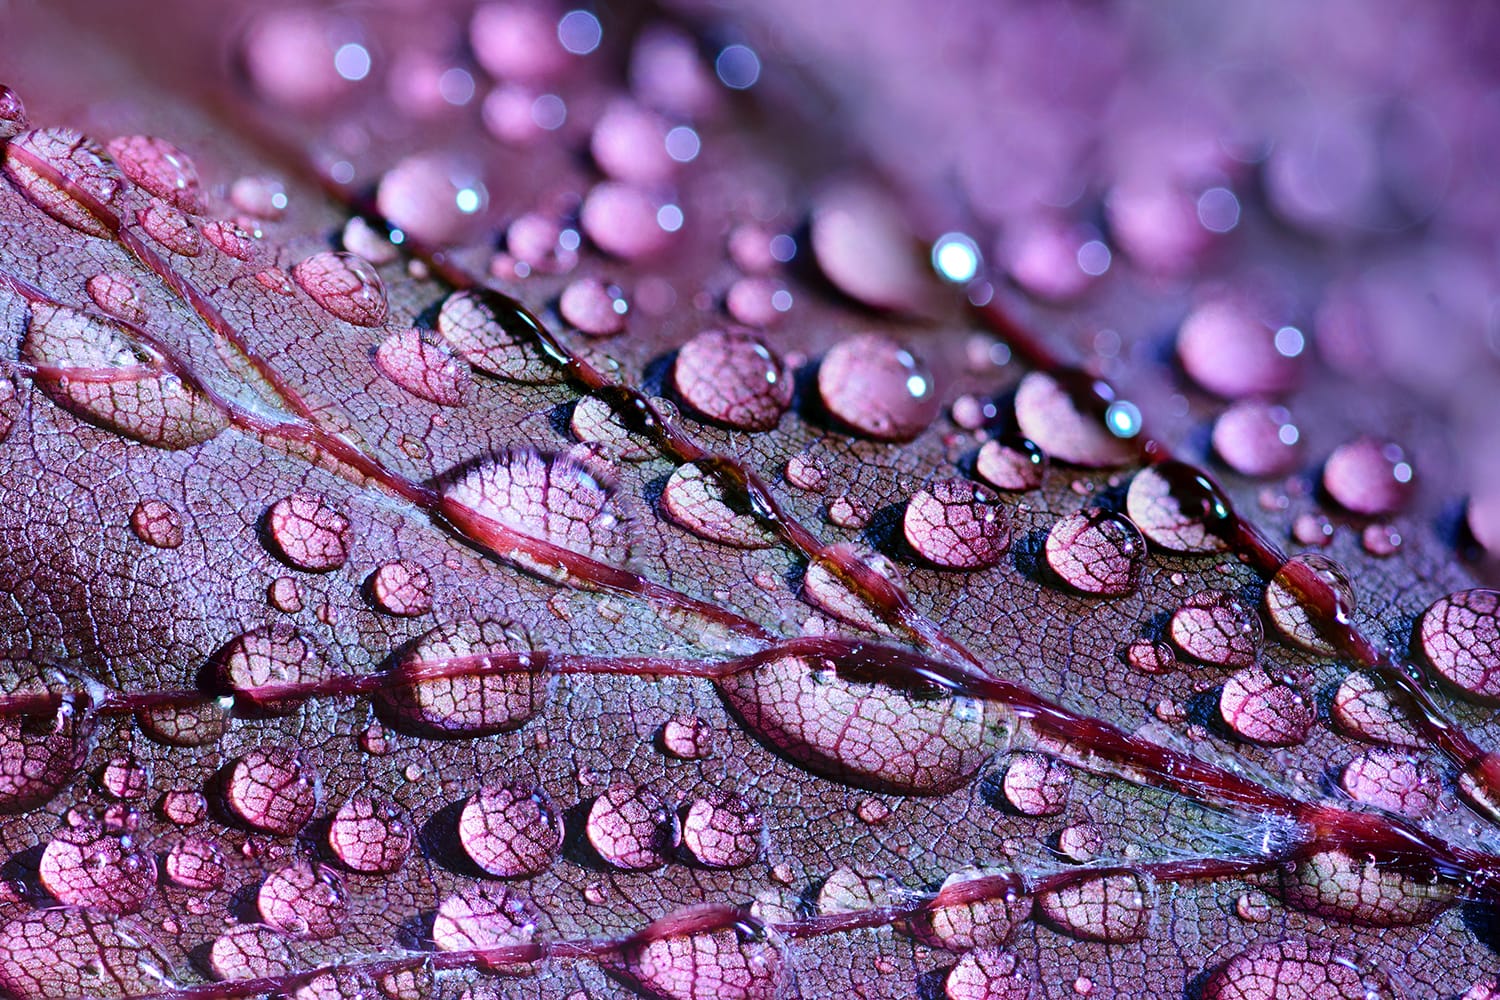 10 Can't-Miss Tips for Capturing Exceptional Macro Images